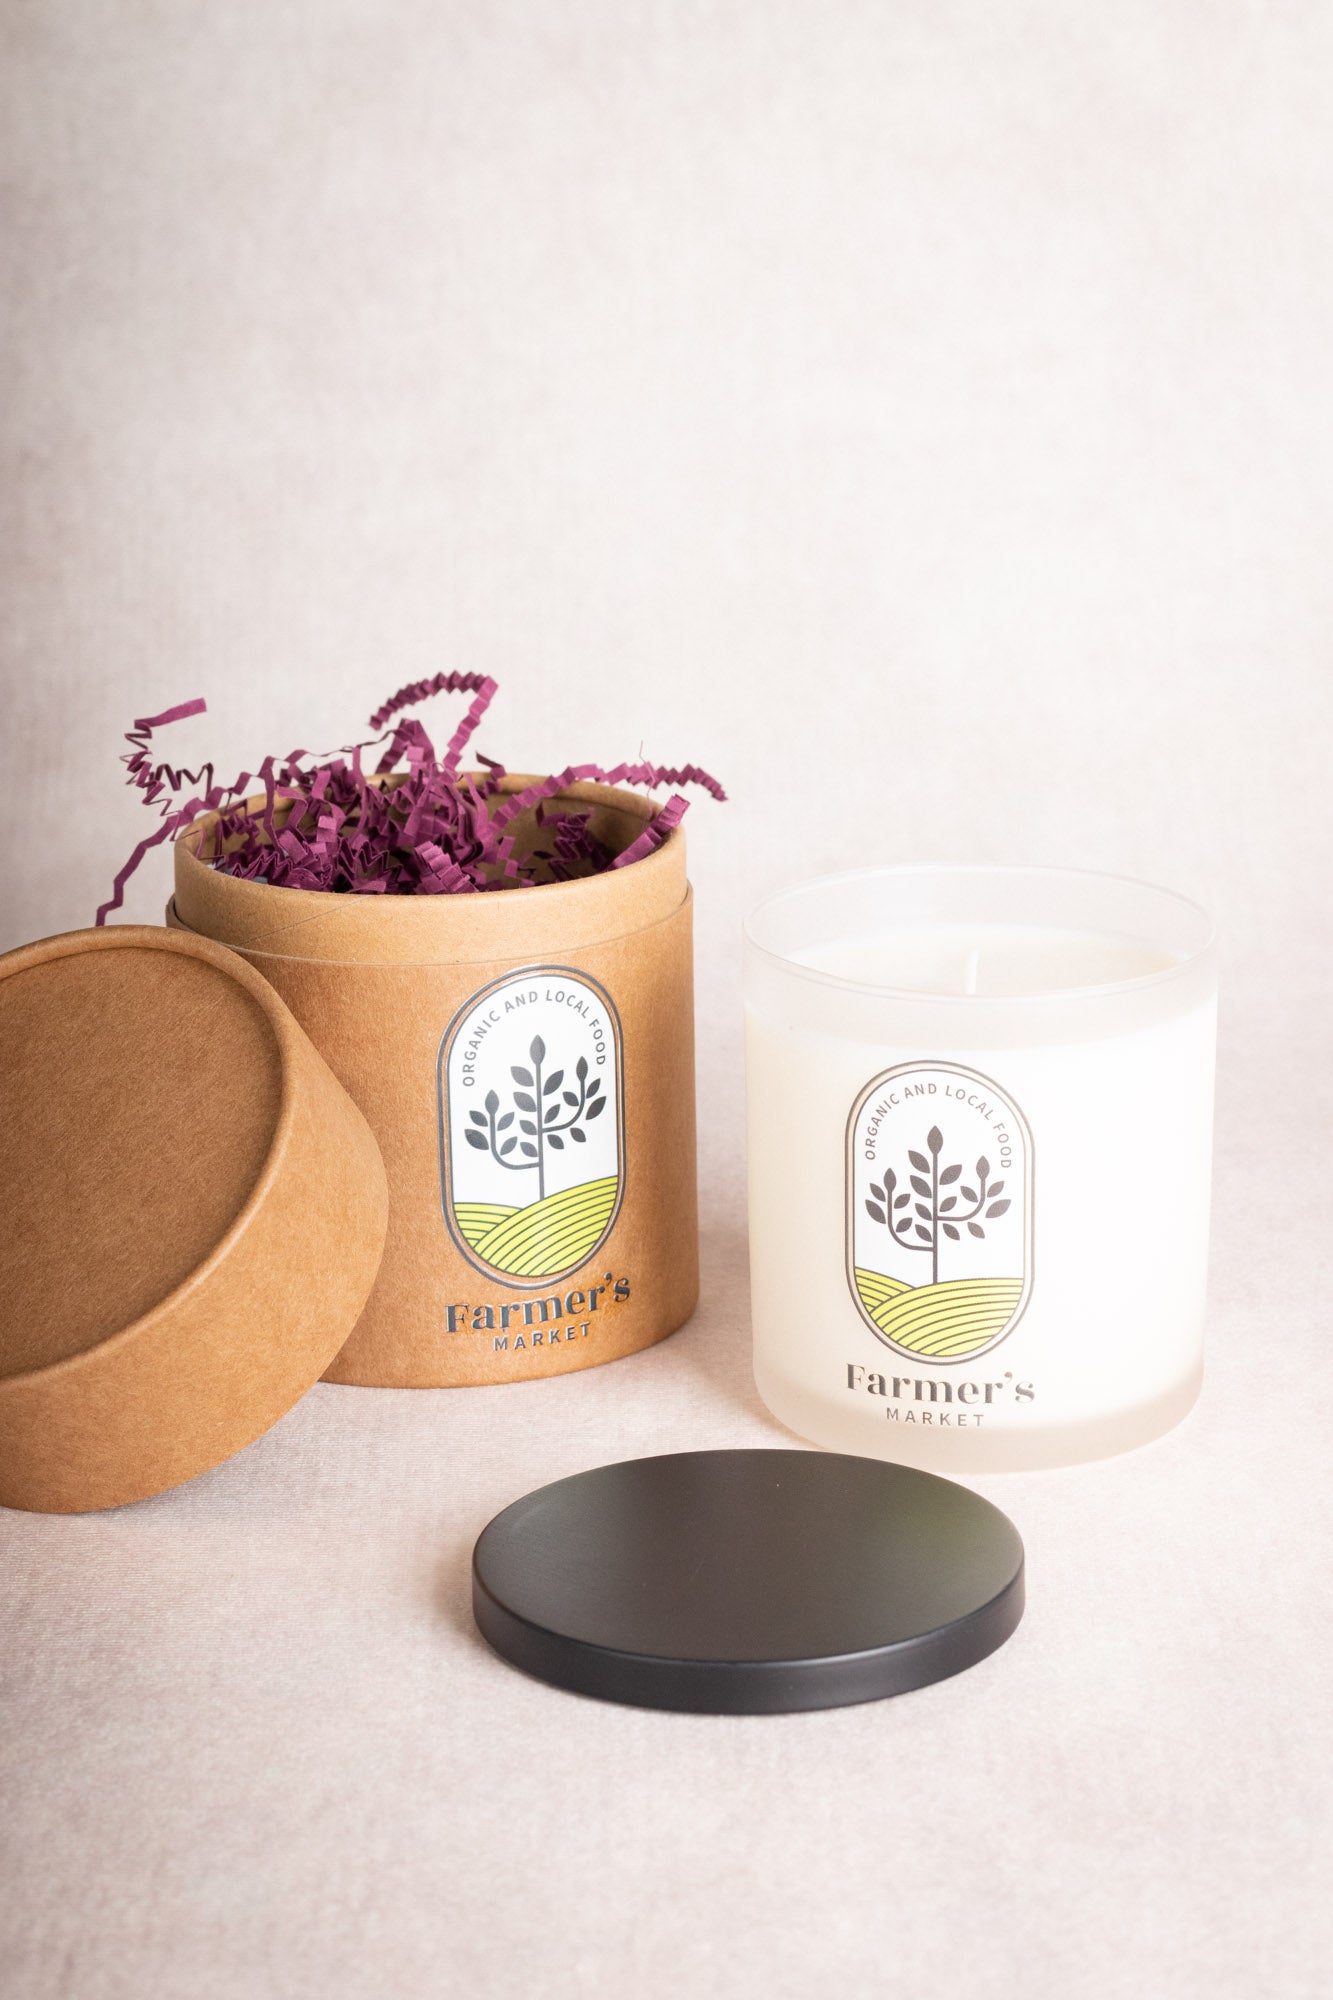 Serene Elegance: Private Label Candles Wholesale in Matte White Glass